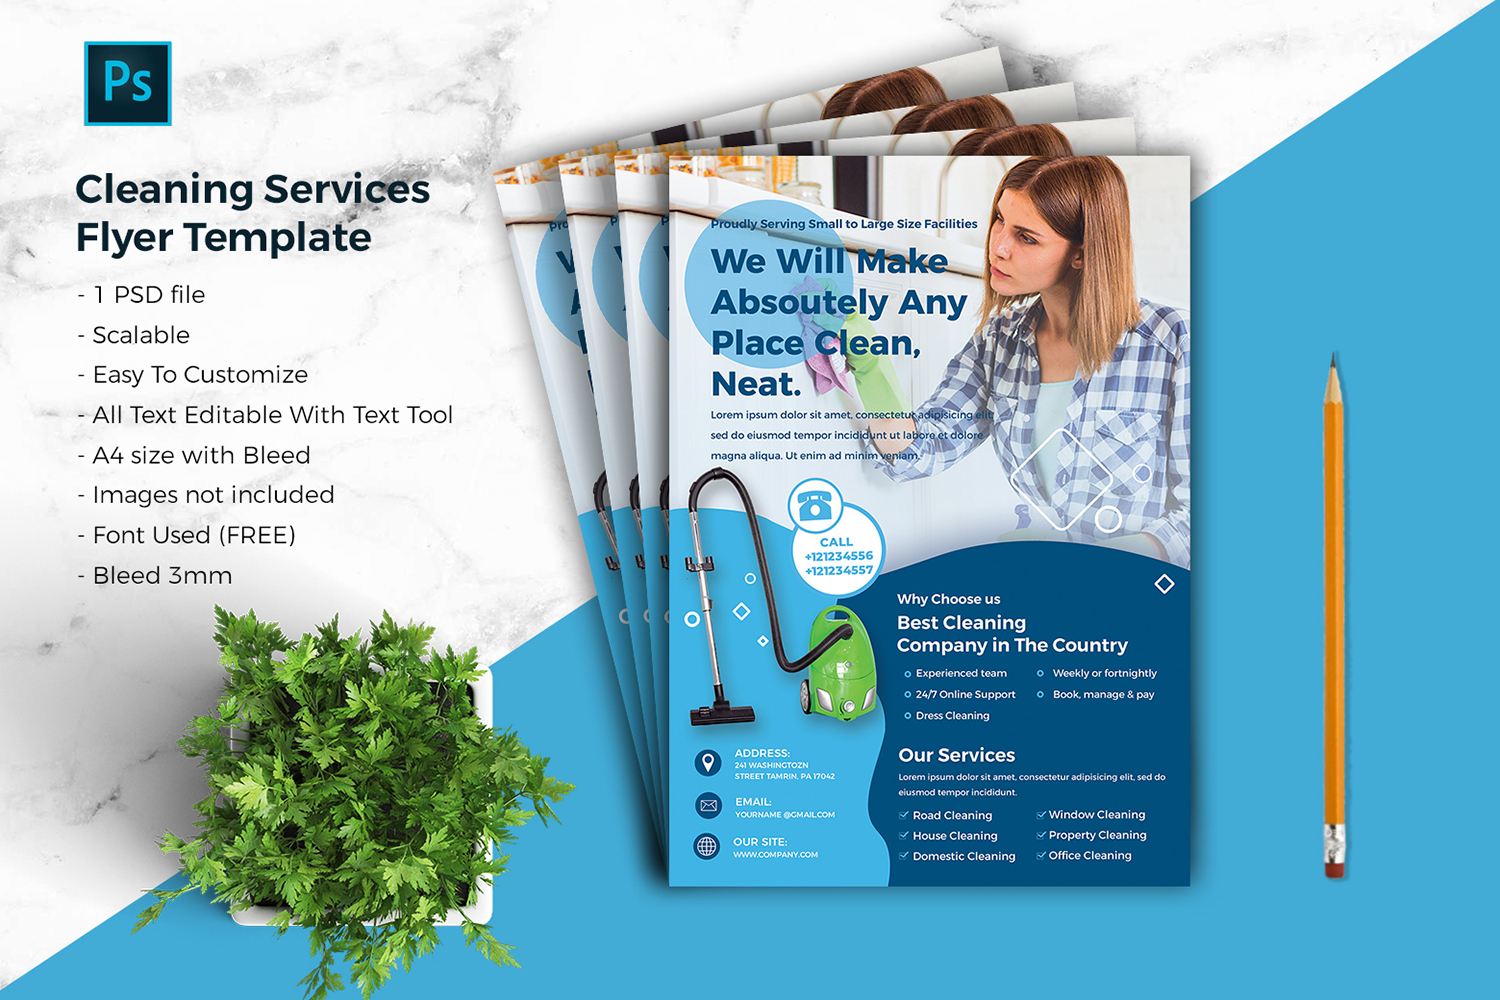 Cleaning Services Flyer vol.01 Corporate identity template